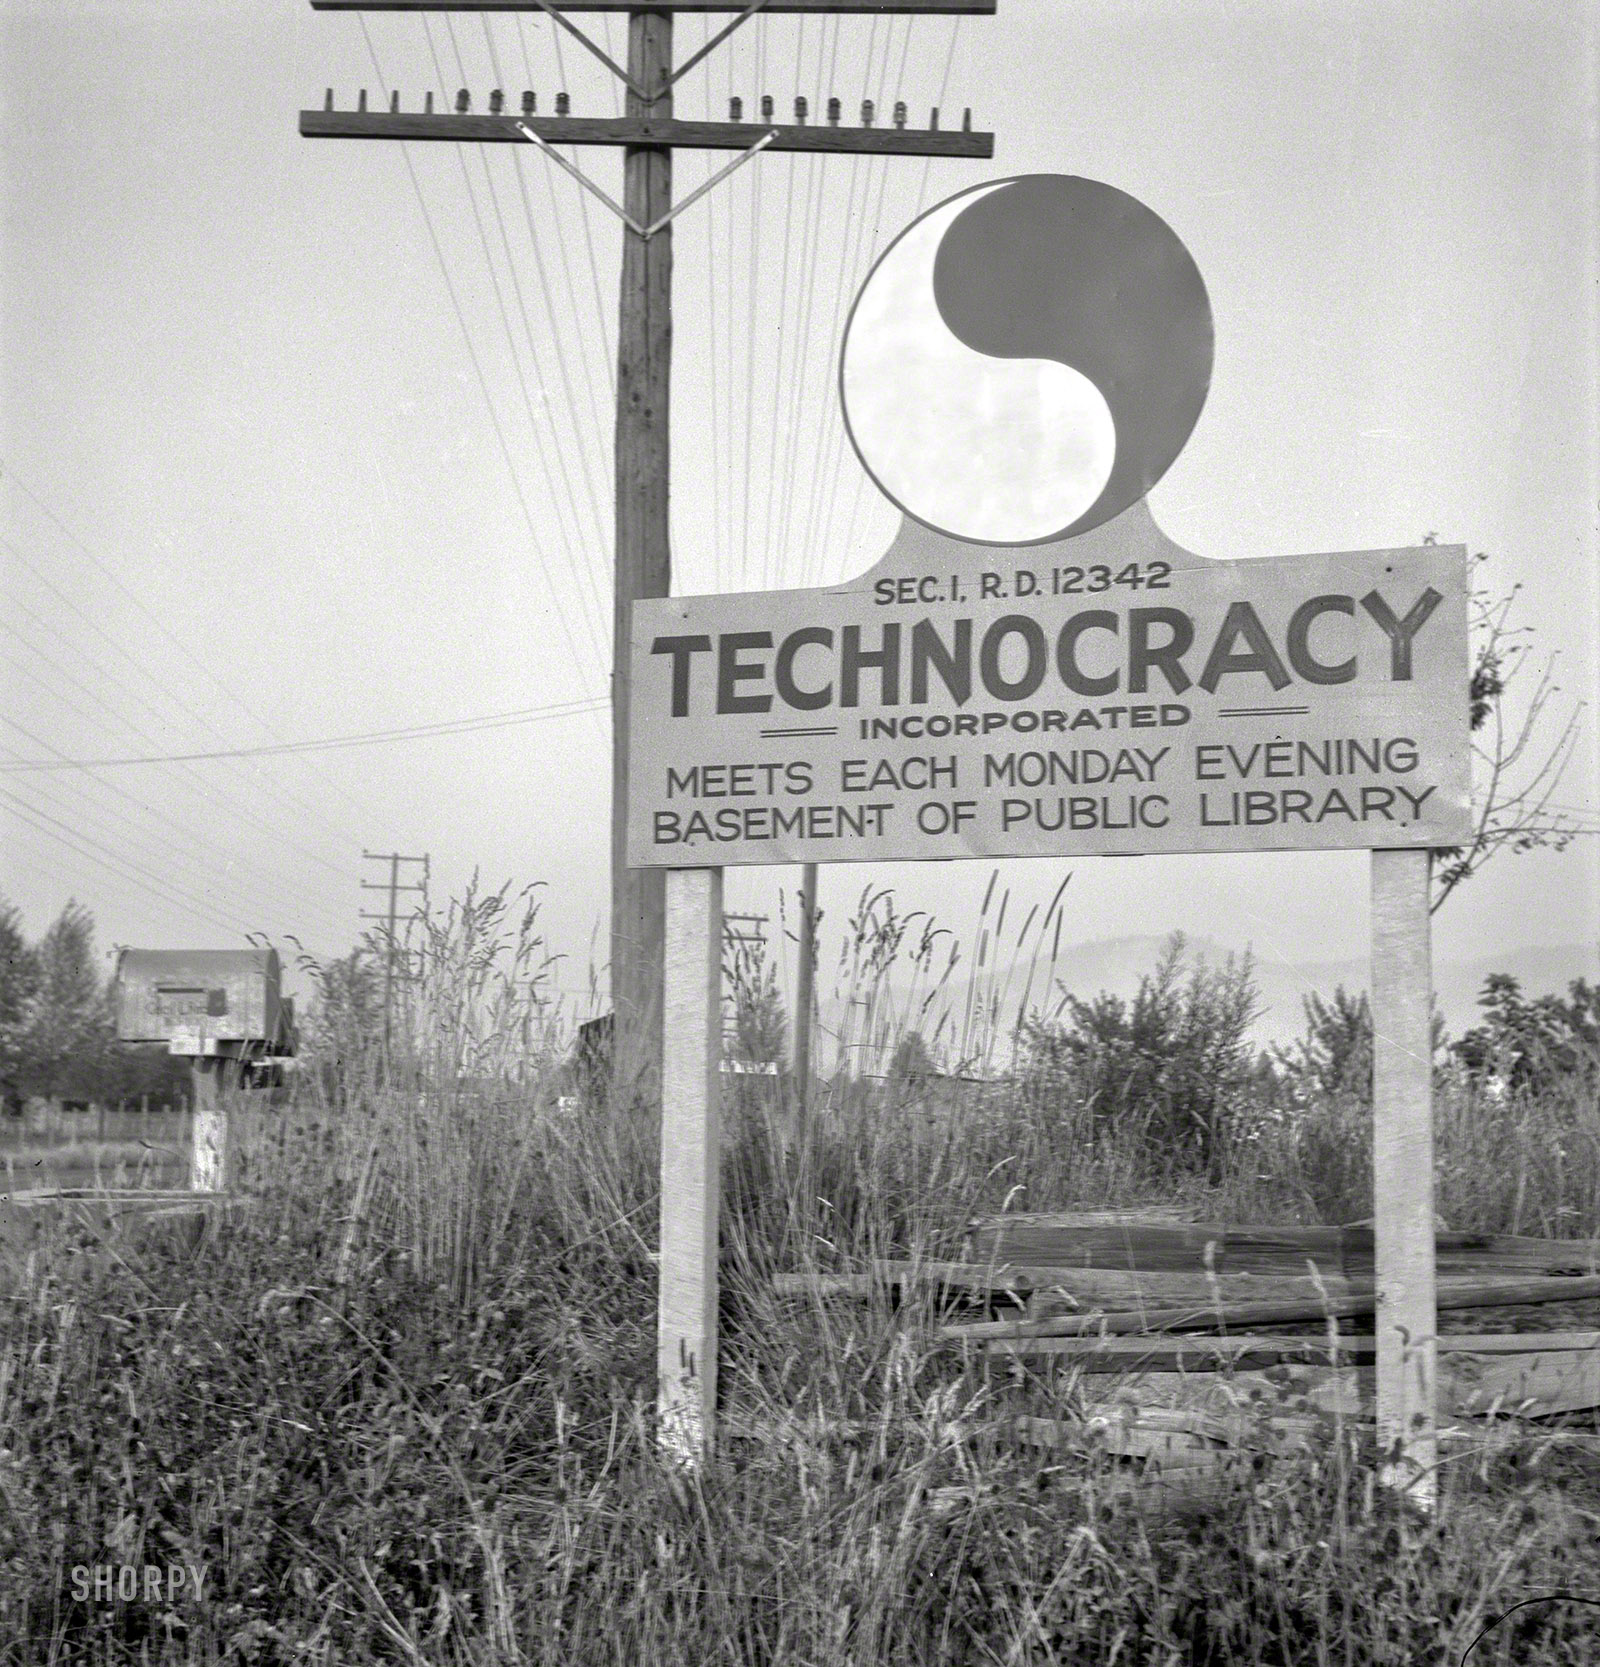 August 1939. Josephine County, Oregon. "New sign, erected seven years after Howard Scott talked of a survey of North America and formation of 'energy units,' which had widespread vogue in the early years of Depression." Another of Dorothea Lange's quirky-sign photos. View full size.